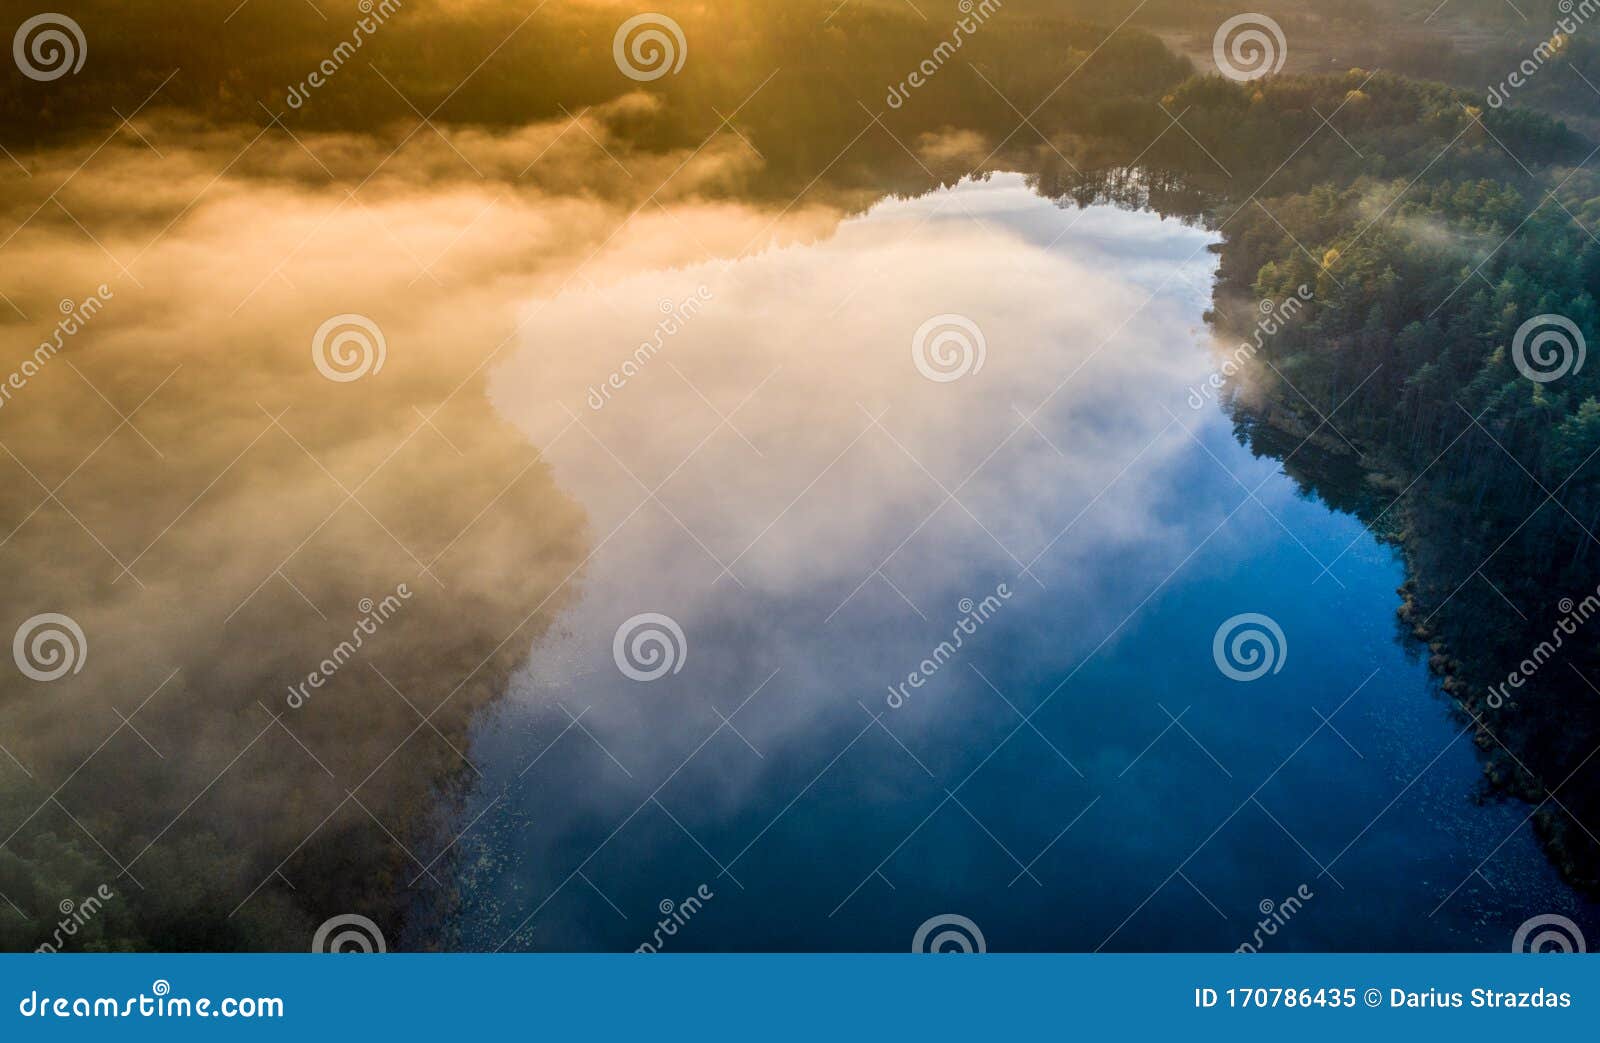 very nice aerial landscape of lake and mist during sunrise